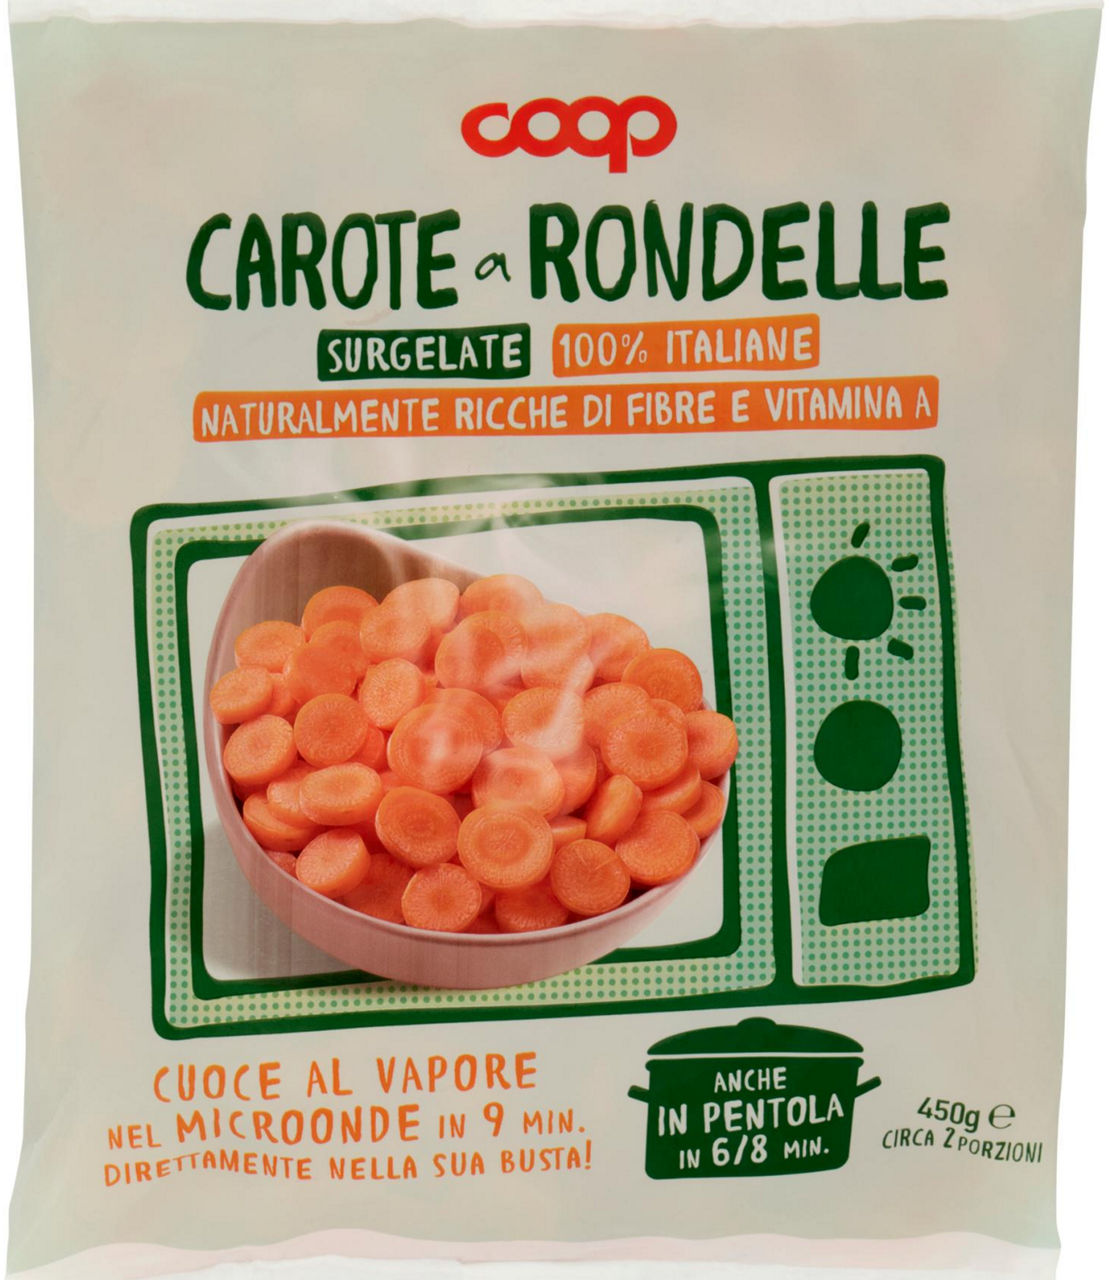 Carote a rondelle micoondabili coop busta g 450